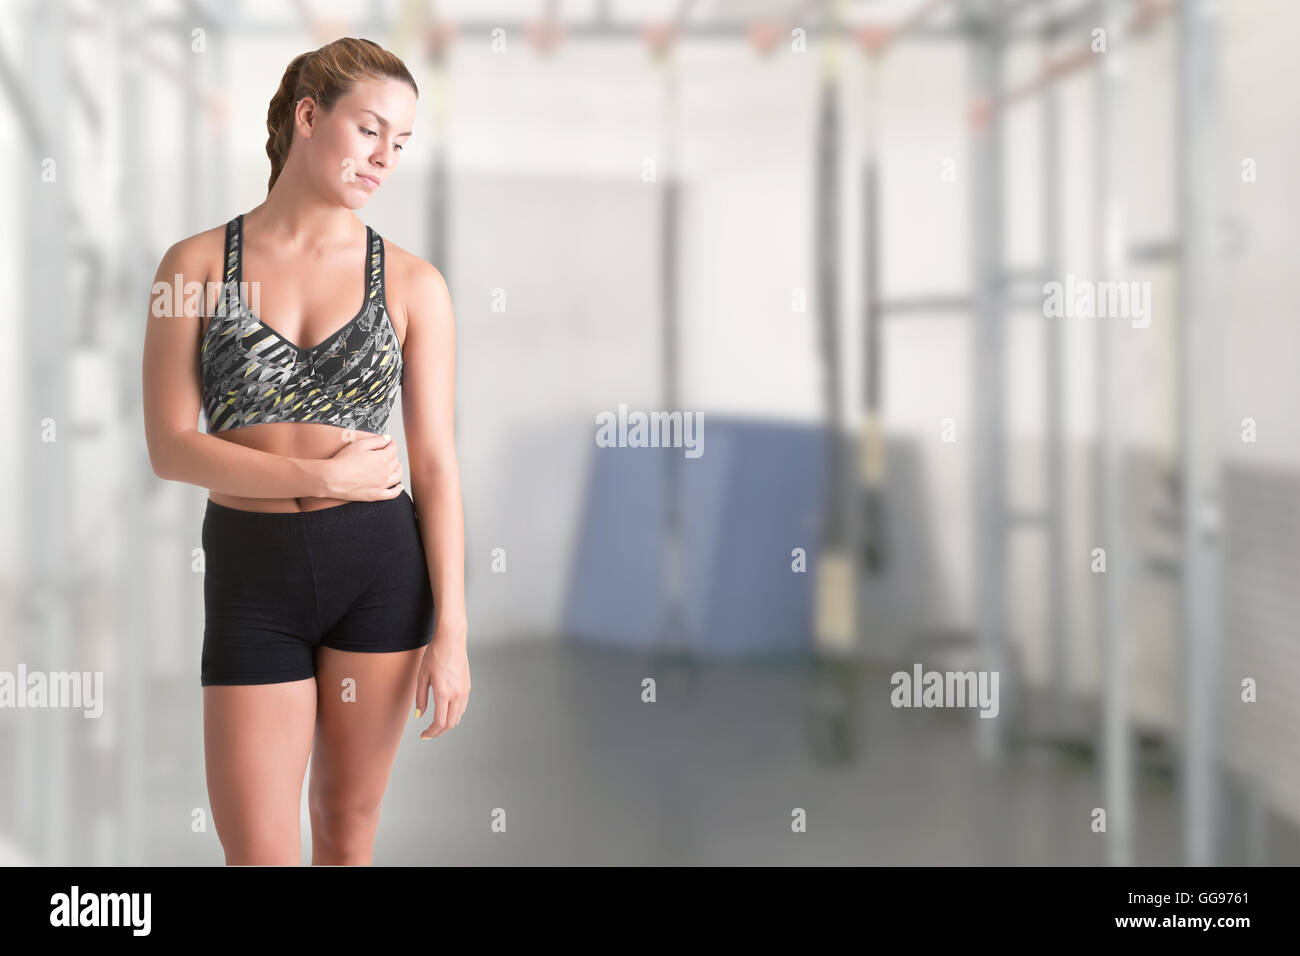 Fit woman standing and relaxing after a workout, in a gym Stock Photo